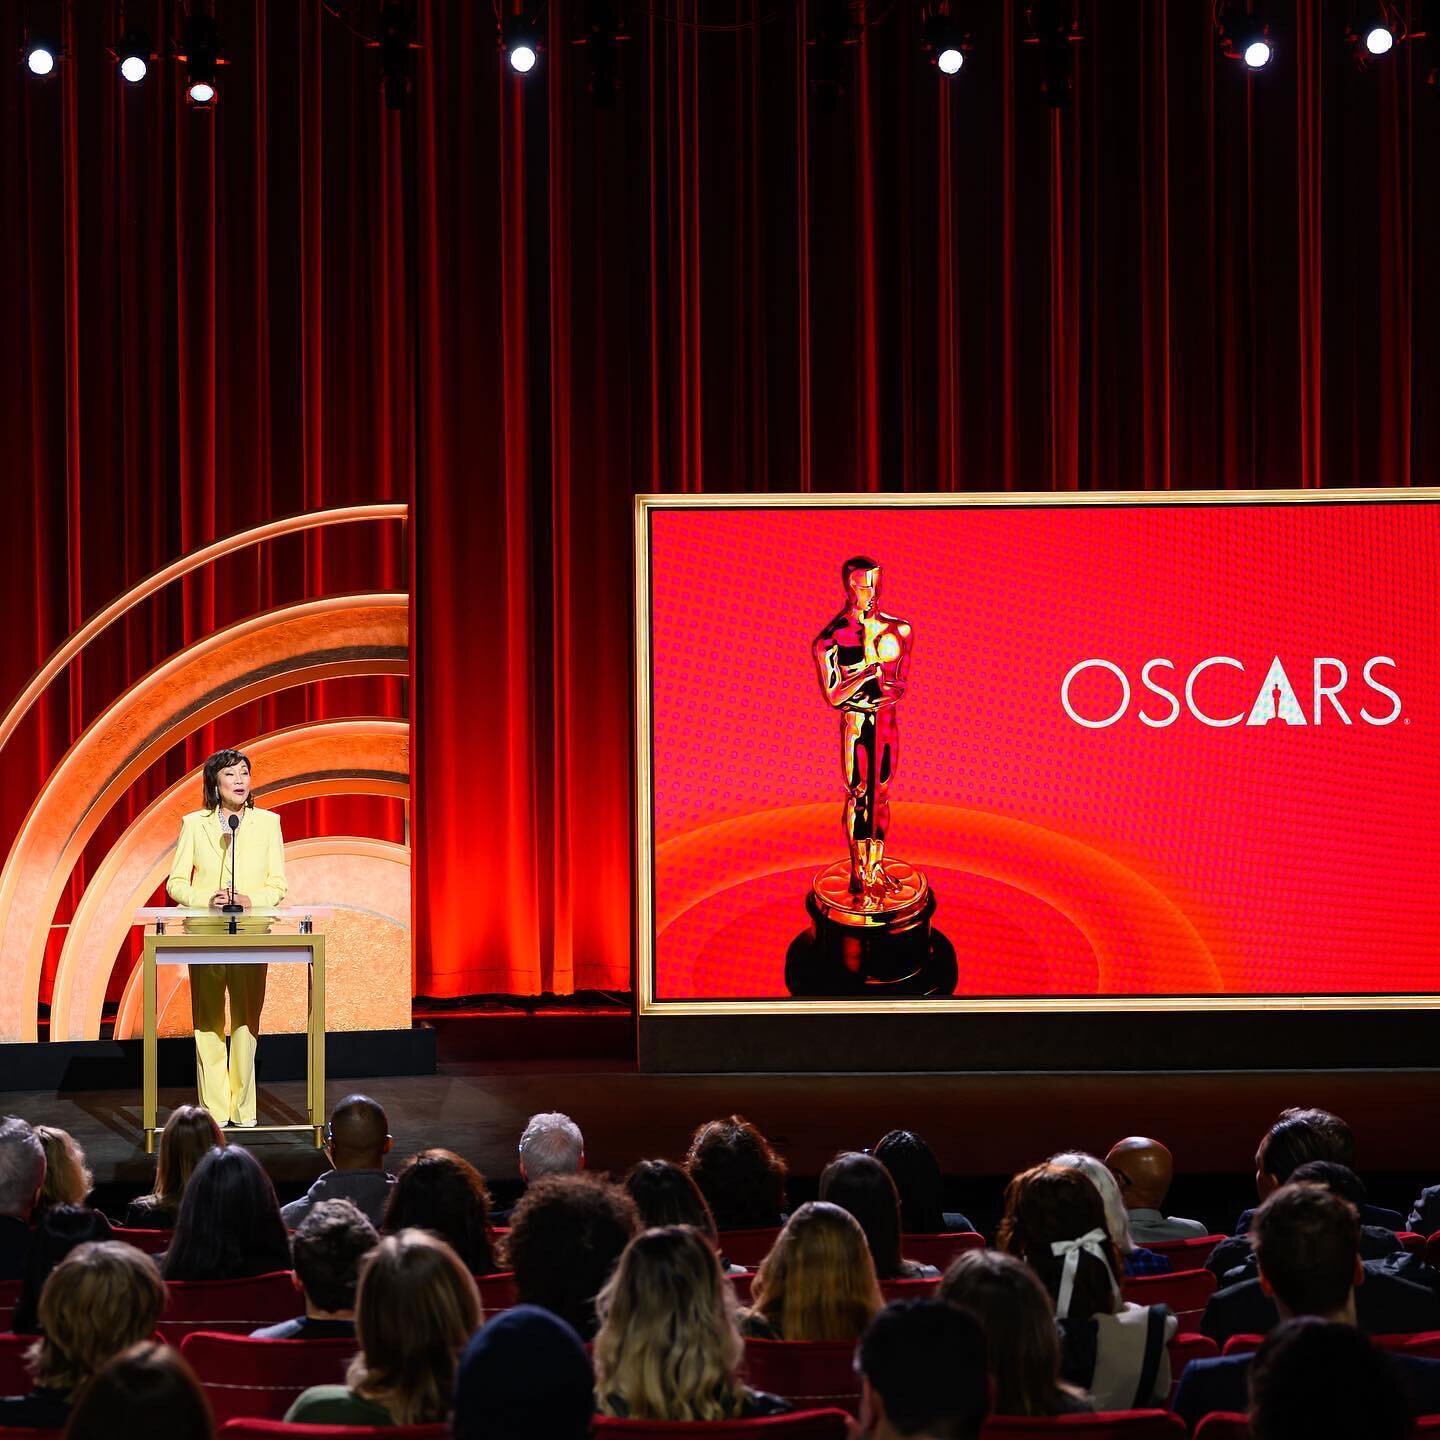 CONGRATS TO ALL THE OSCAR NOMINEES!

So many milestones this year:

🌎 Members from 93 countries participated in nominations voting.
🎥 Three of the 10 Best Picture Nominees are directed by women. Two of them are first-time filmmakers.
🎉 10 out of 2